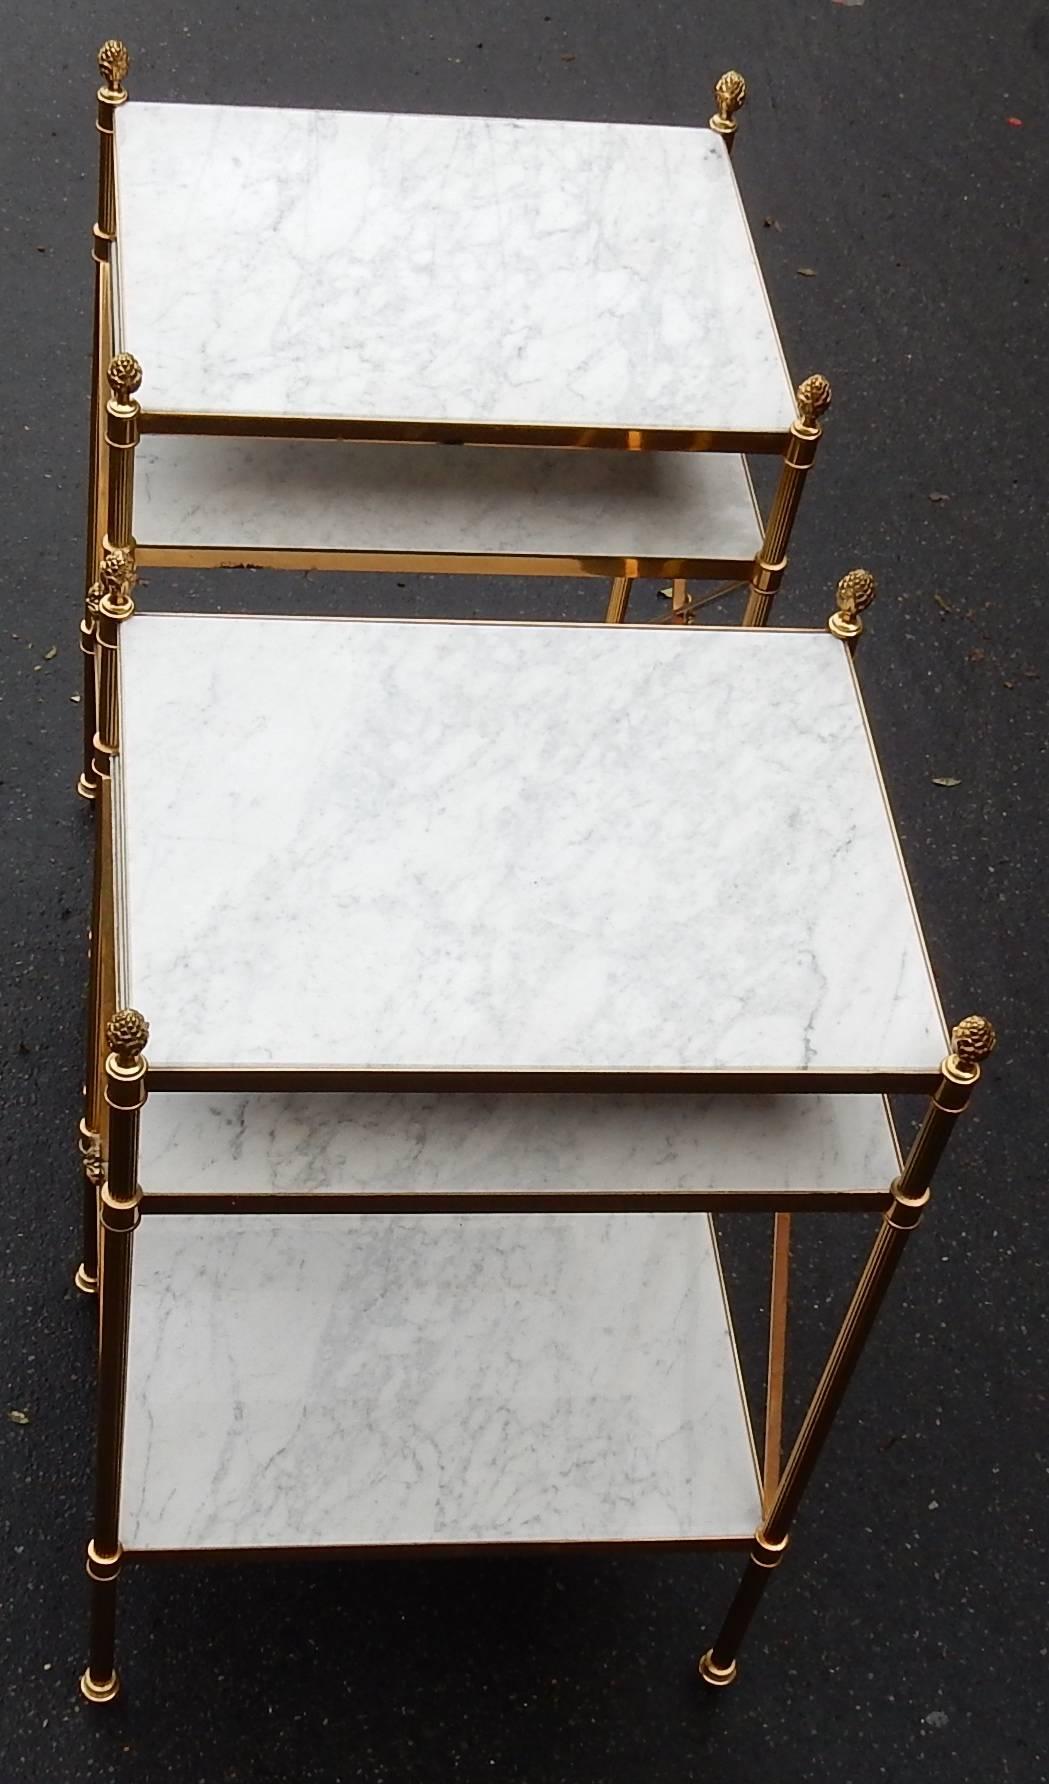 Pair of shelves with three levels with white marble, amount bronze and brass and pine cone, cross brace on the sides, circa 1950-1970, good condition.